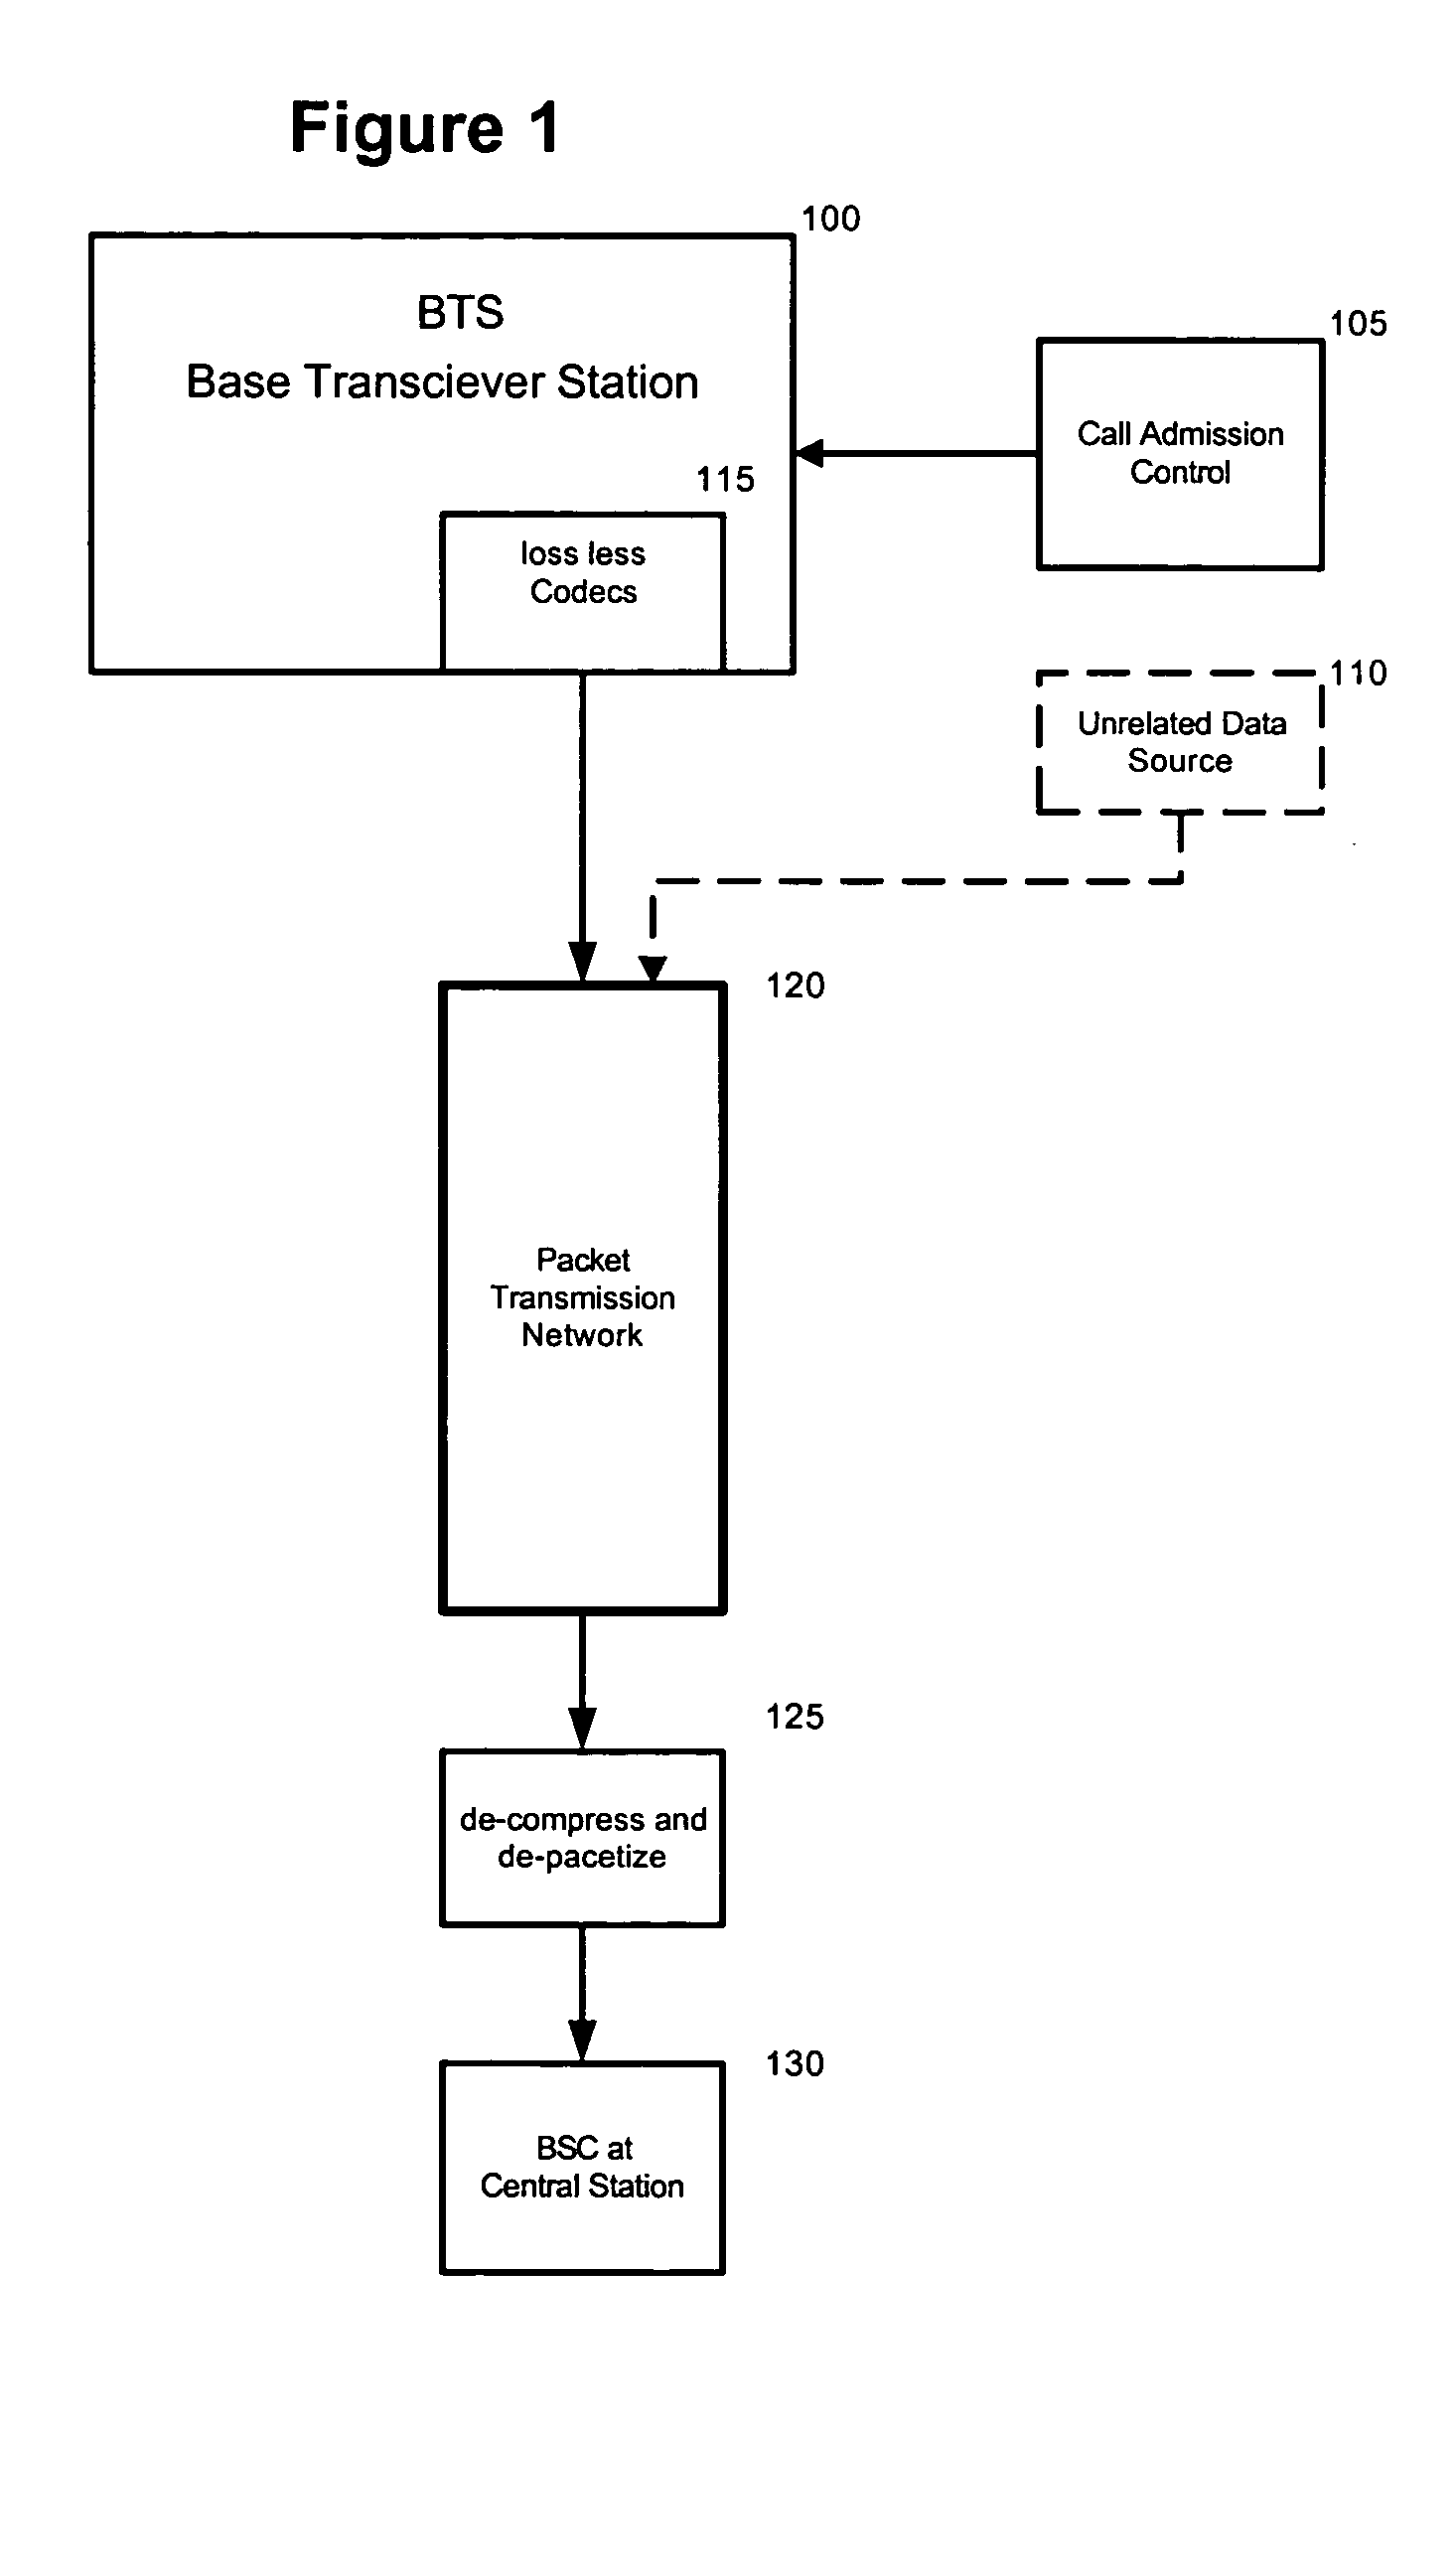 Adaptive call admission control for calls handled over a compressed clear channel